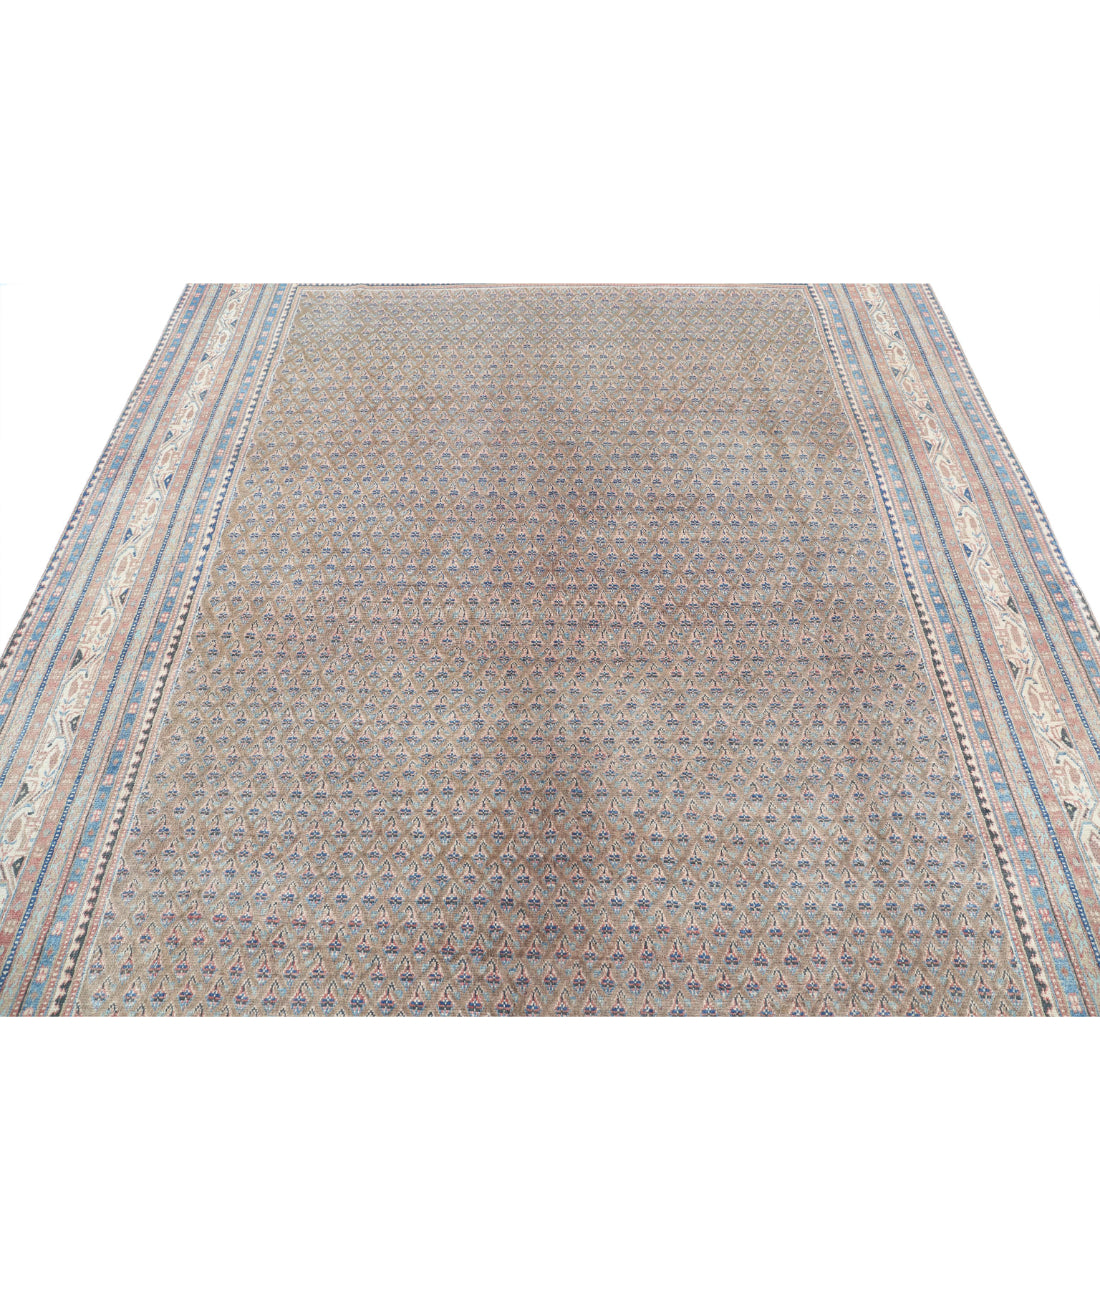 Hand Knotted Vintage Persian Mir Saraband Wool Rug - 7'8'' x 10'4'' 7'8'' x 10'4'' (230 X 310) / Taupe / Blue